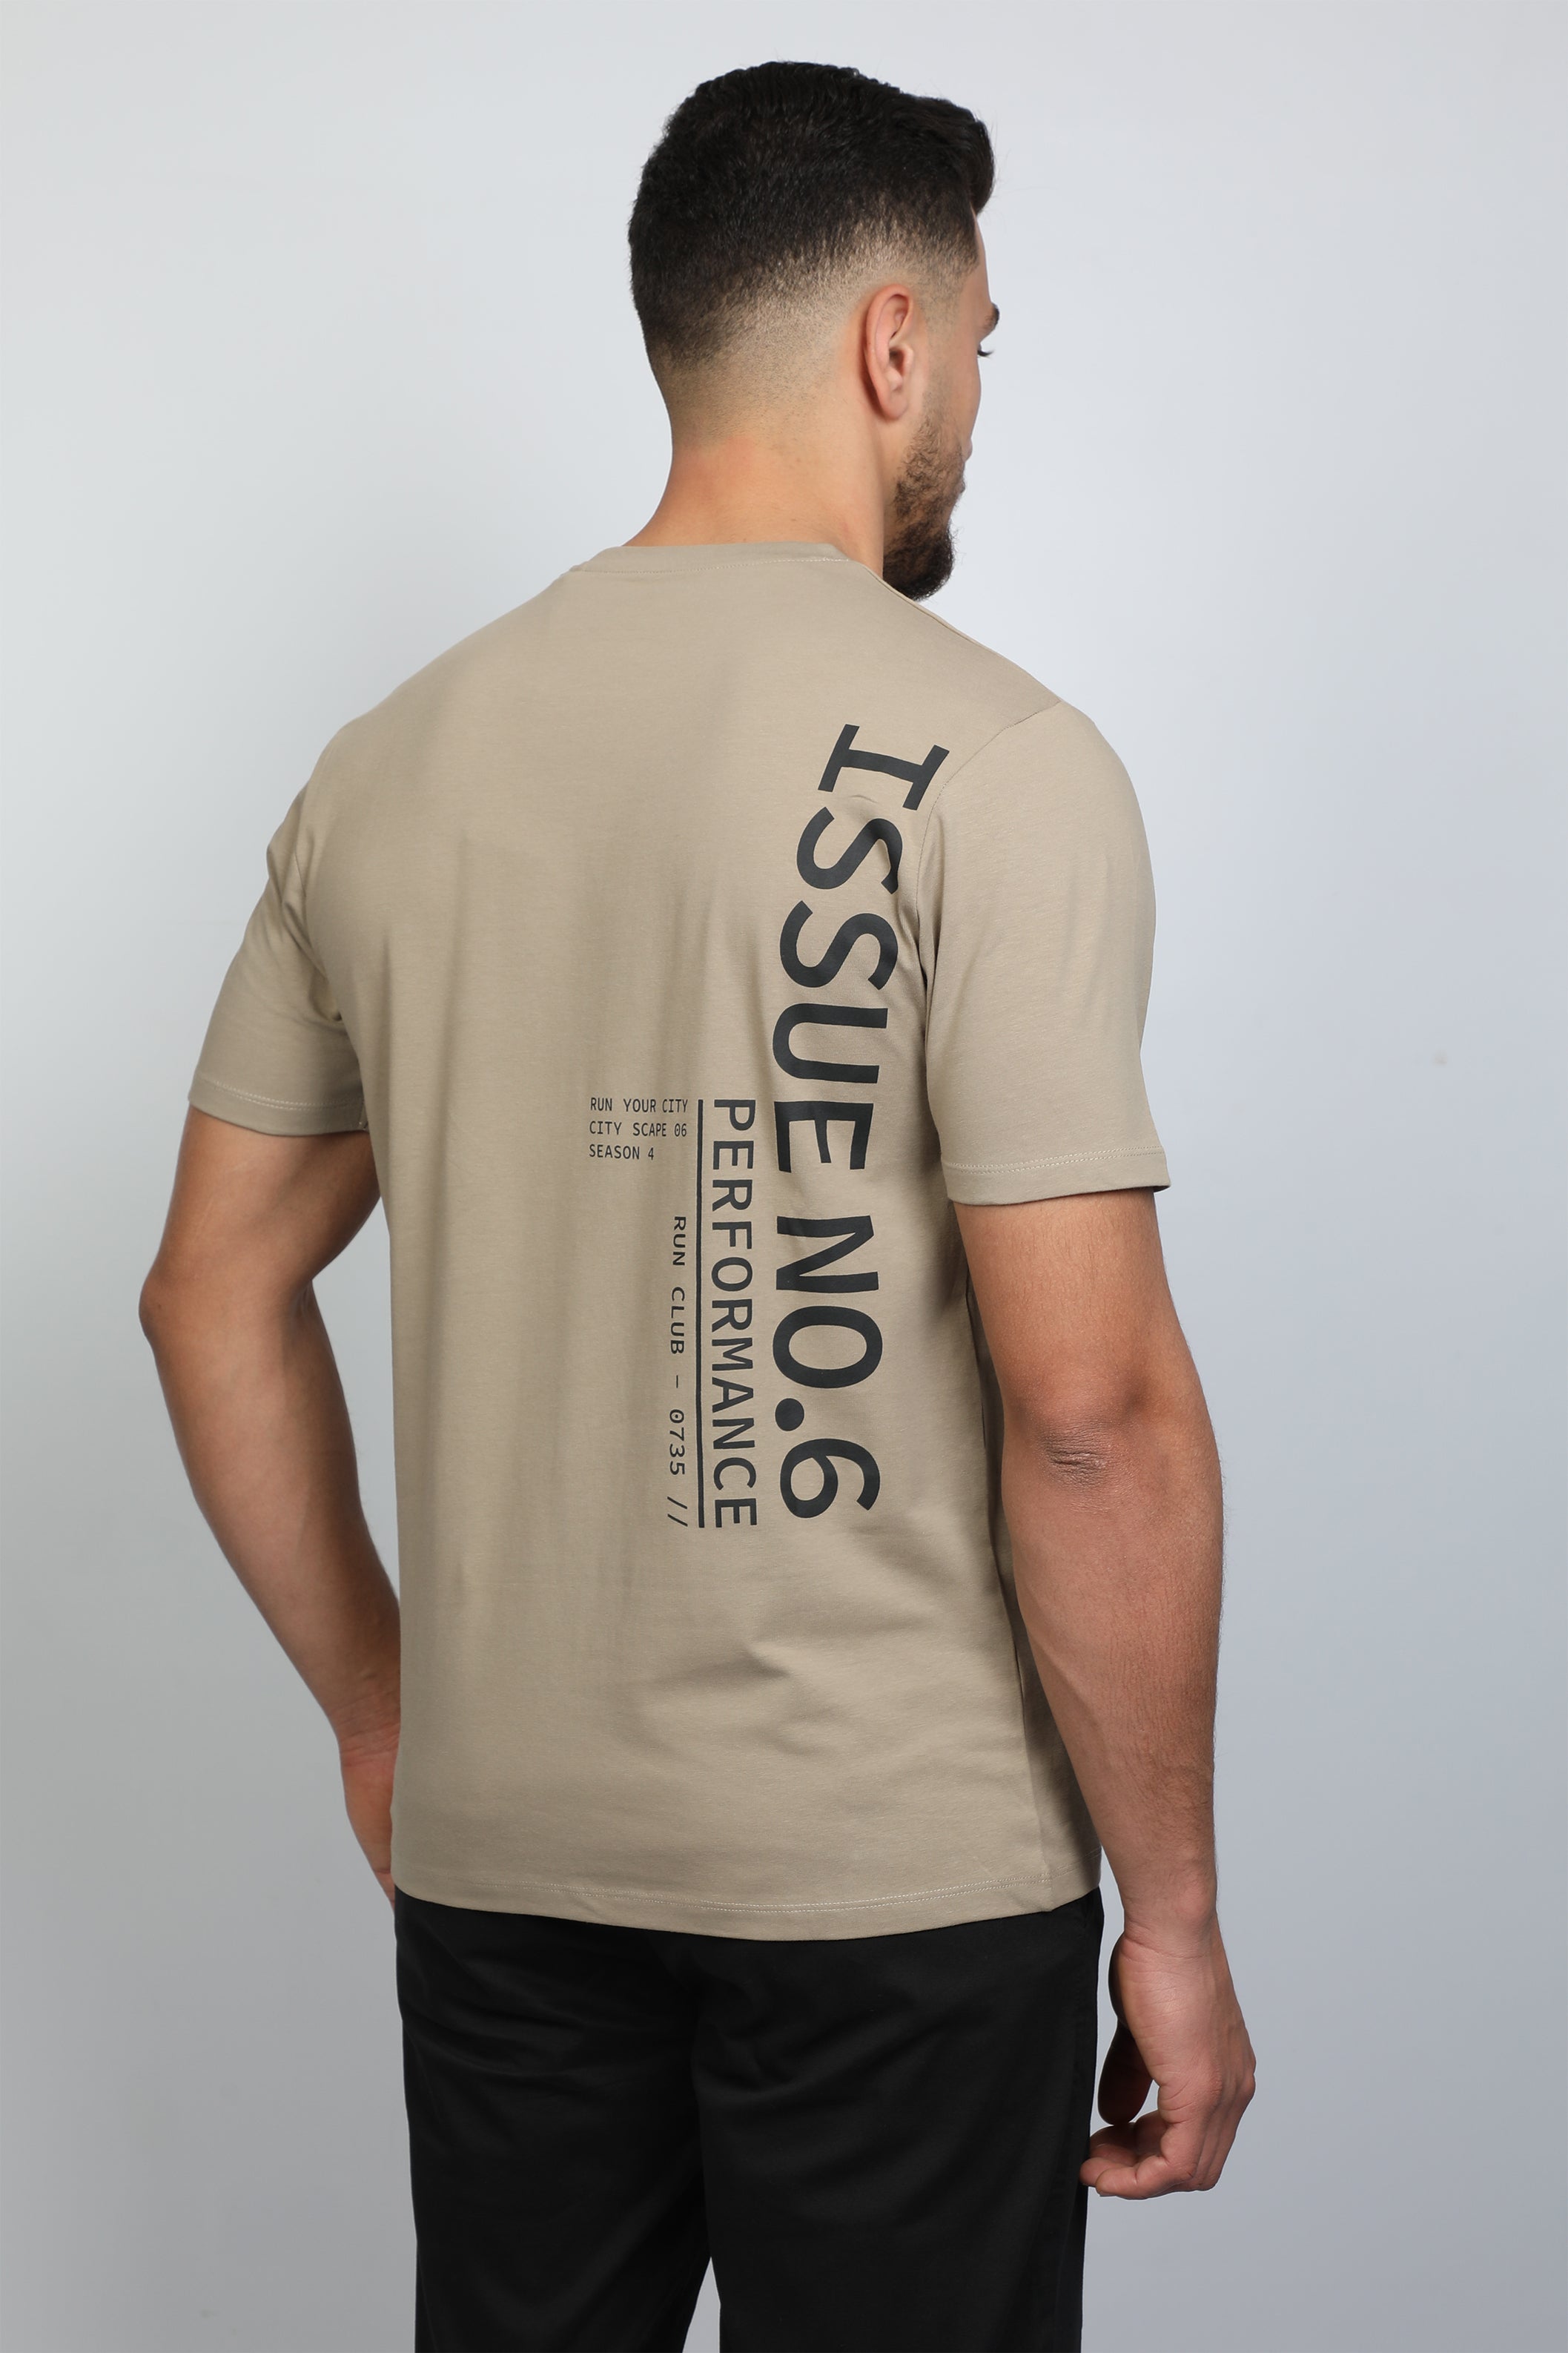 Light Khaki T-shirt With Printed Front and back Design